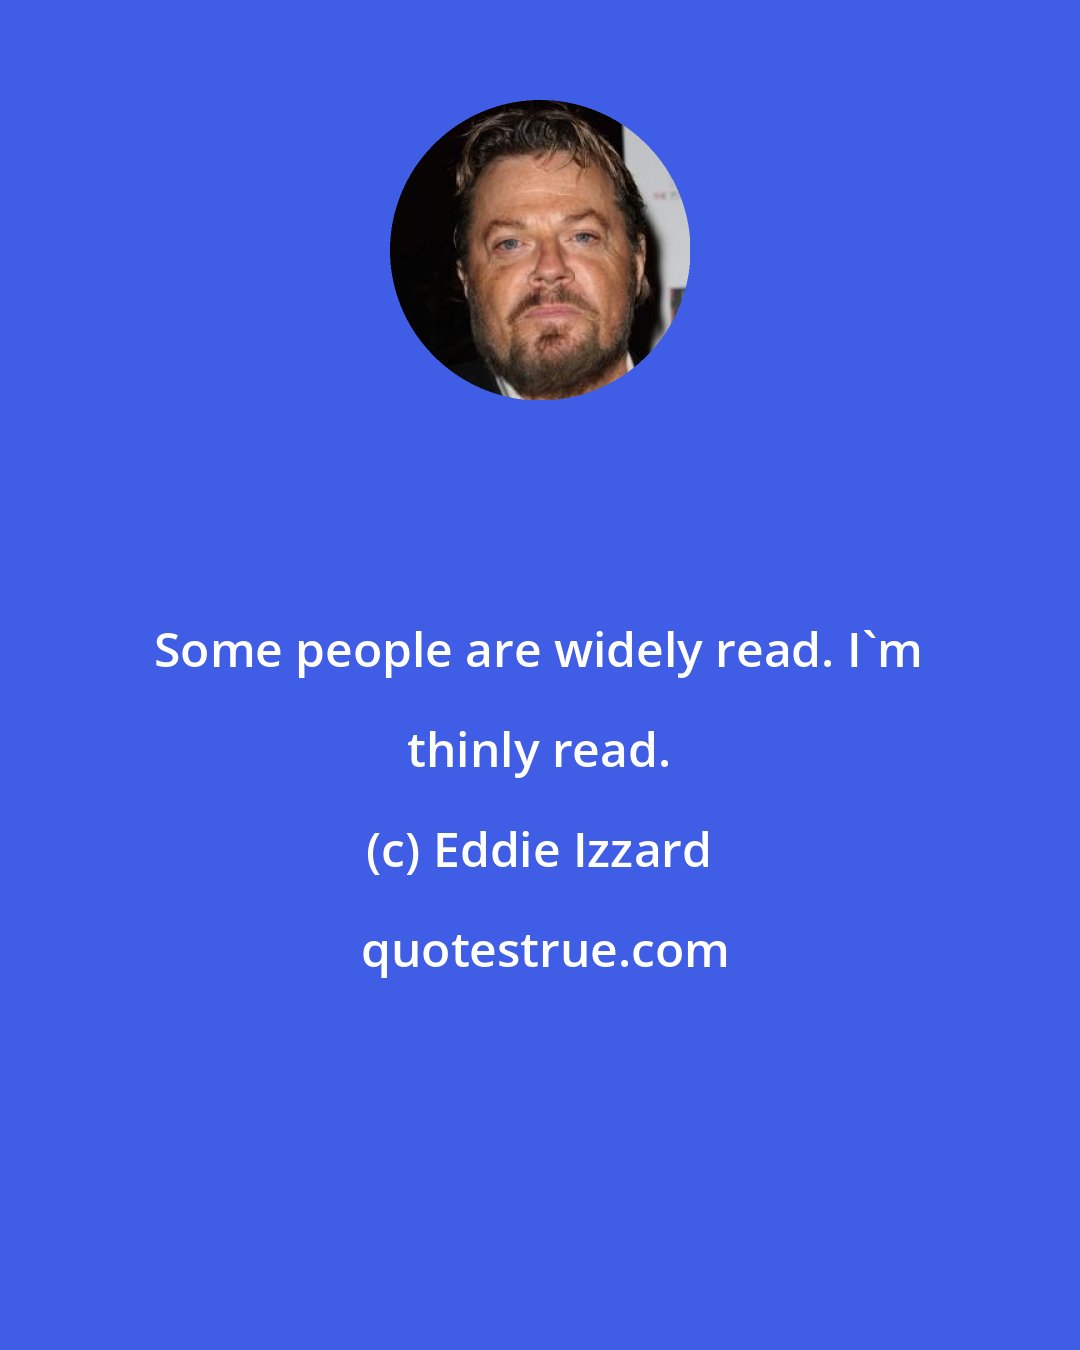 Eddie Izzard: Some people are widely read. I'm thinly read.